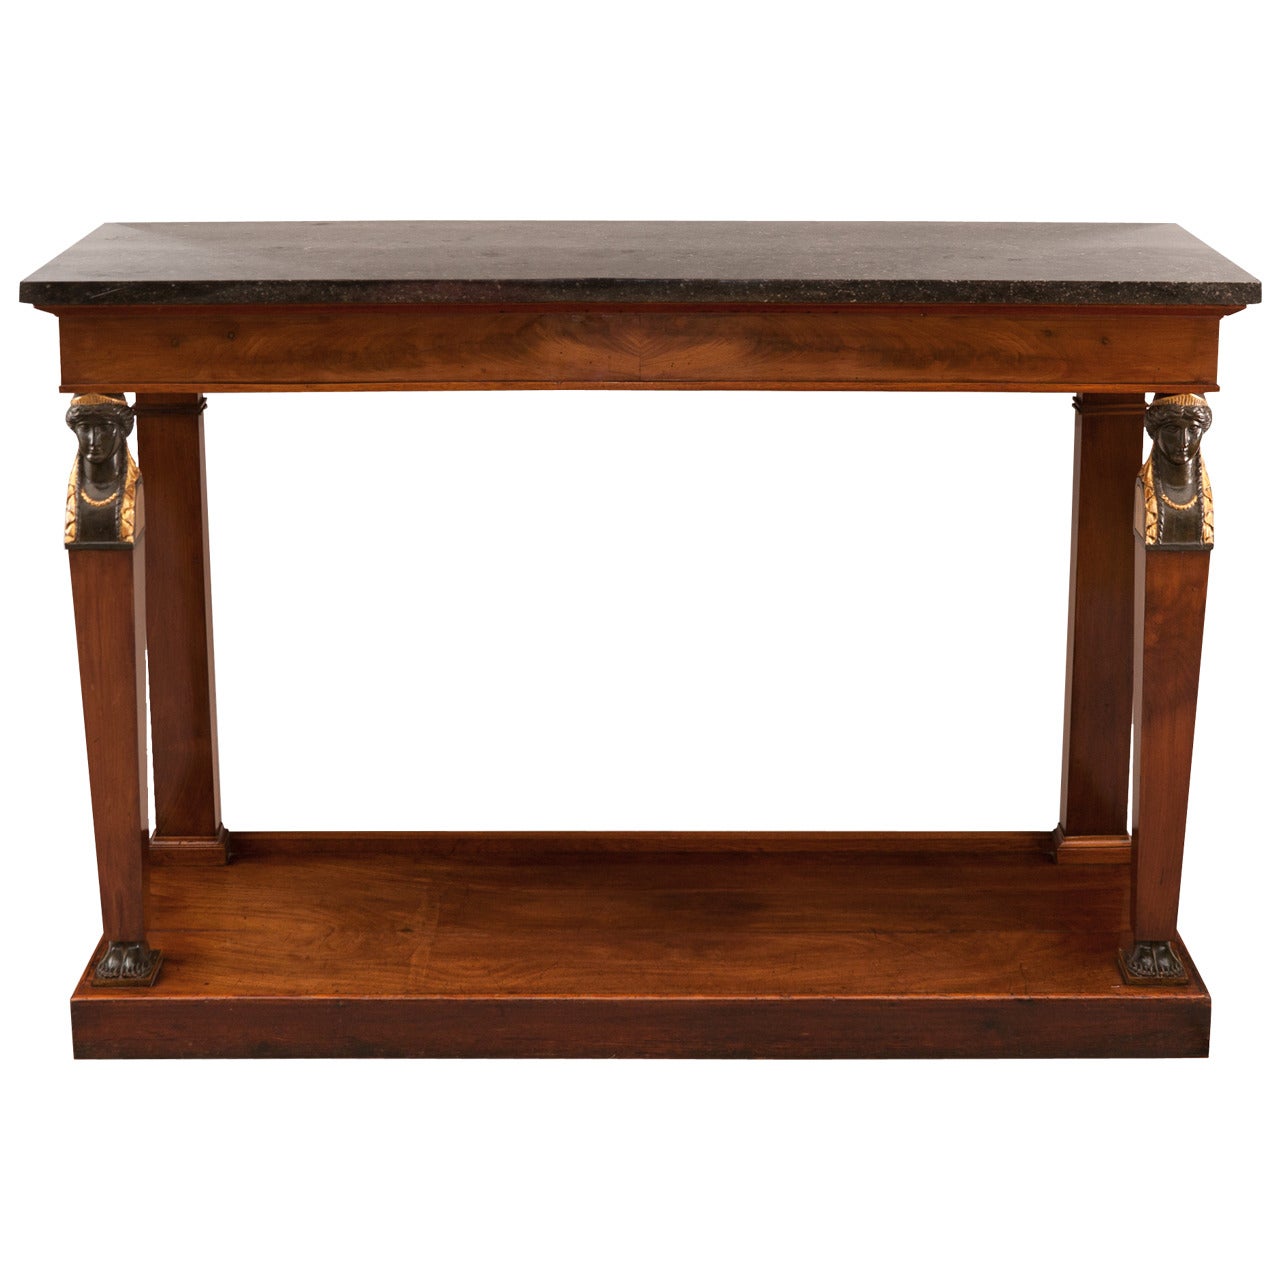 French Early 19th Century Retour D'Egypt Fruitwood Console With Marble Top